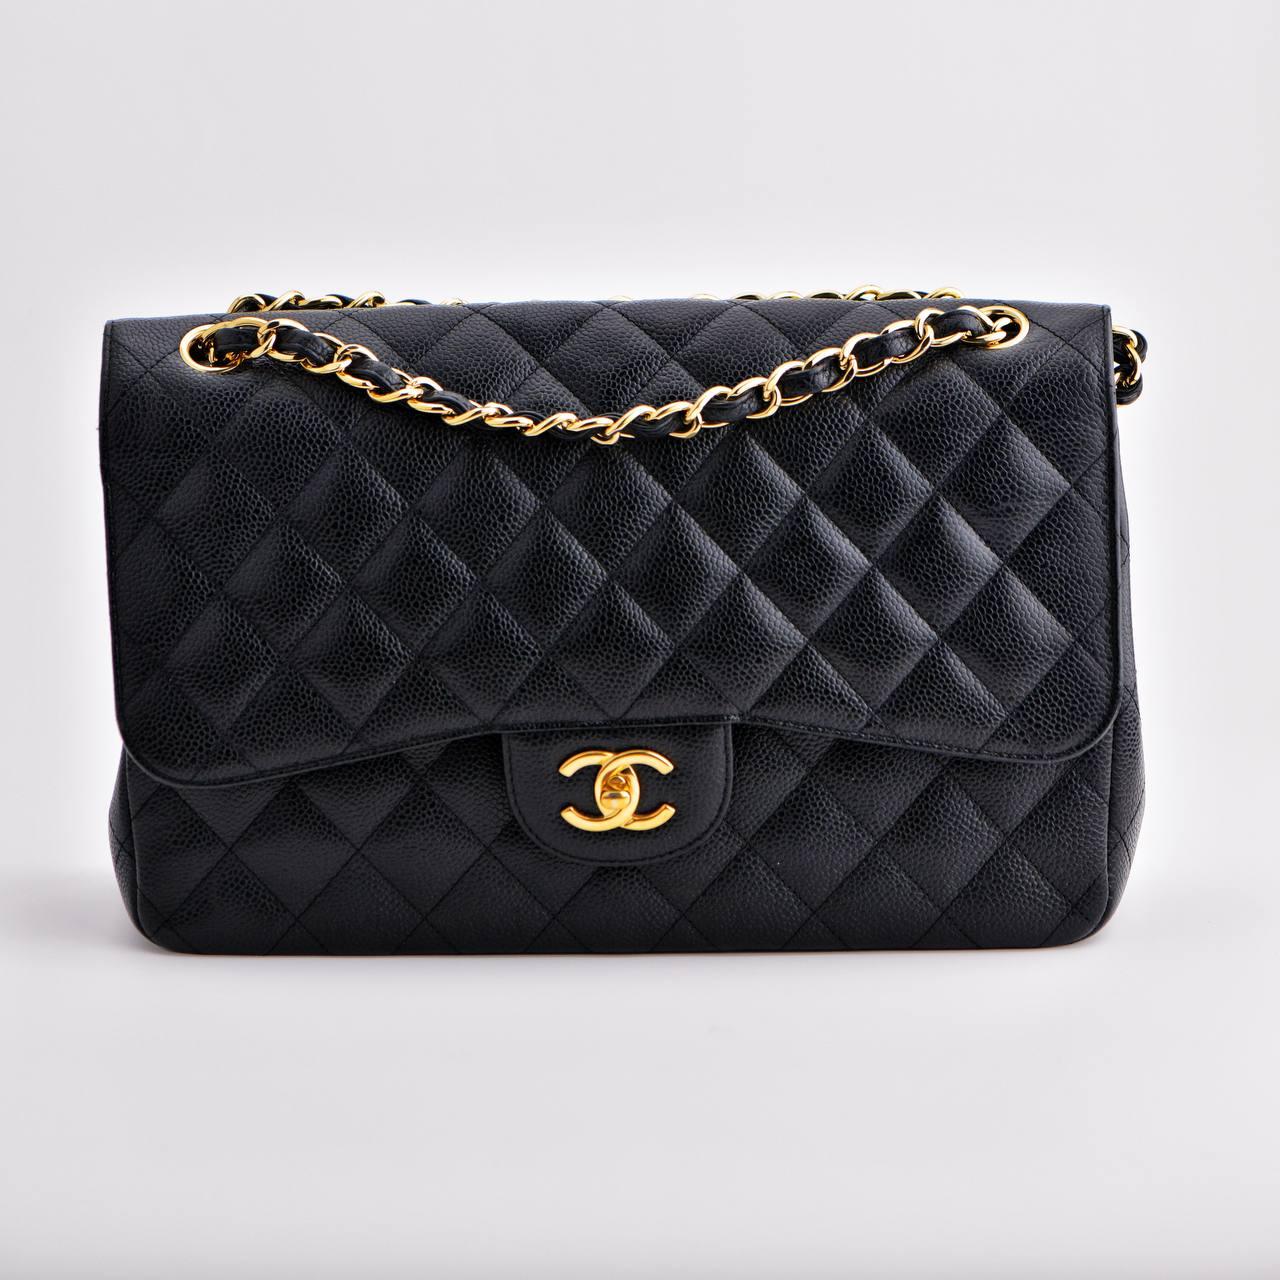 CHANEL Jumbo Black Calfskin Caviar Double Flap Bag with GHW For Sale 9